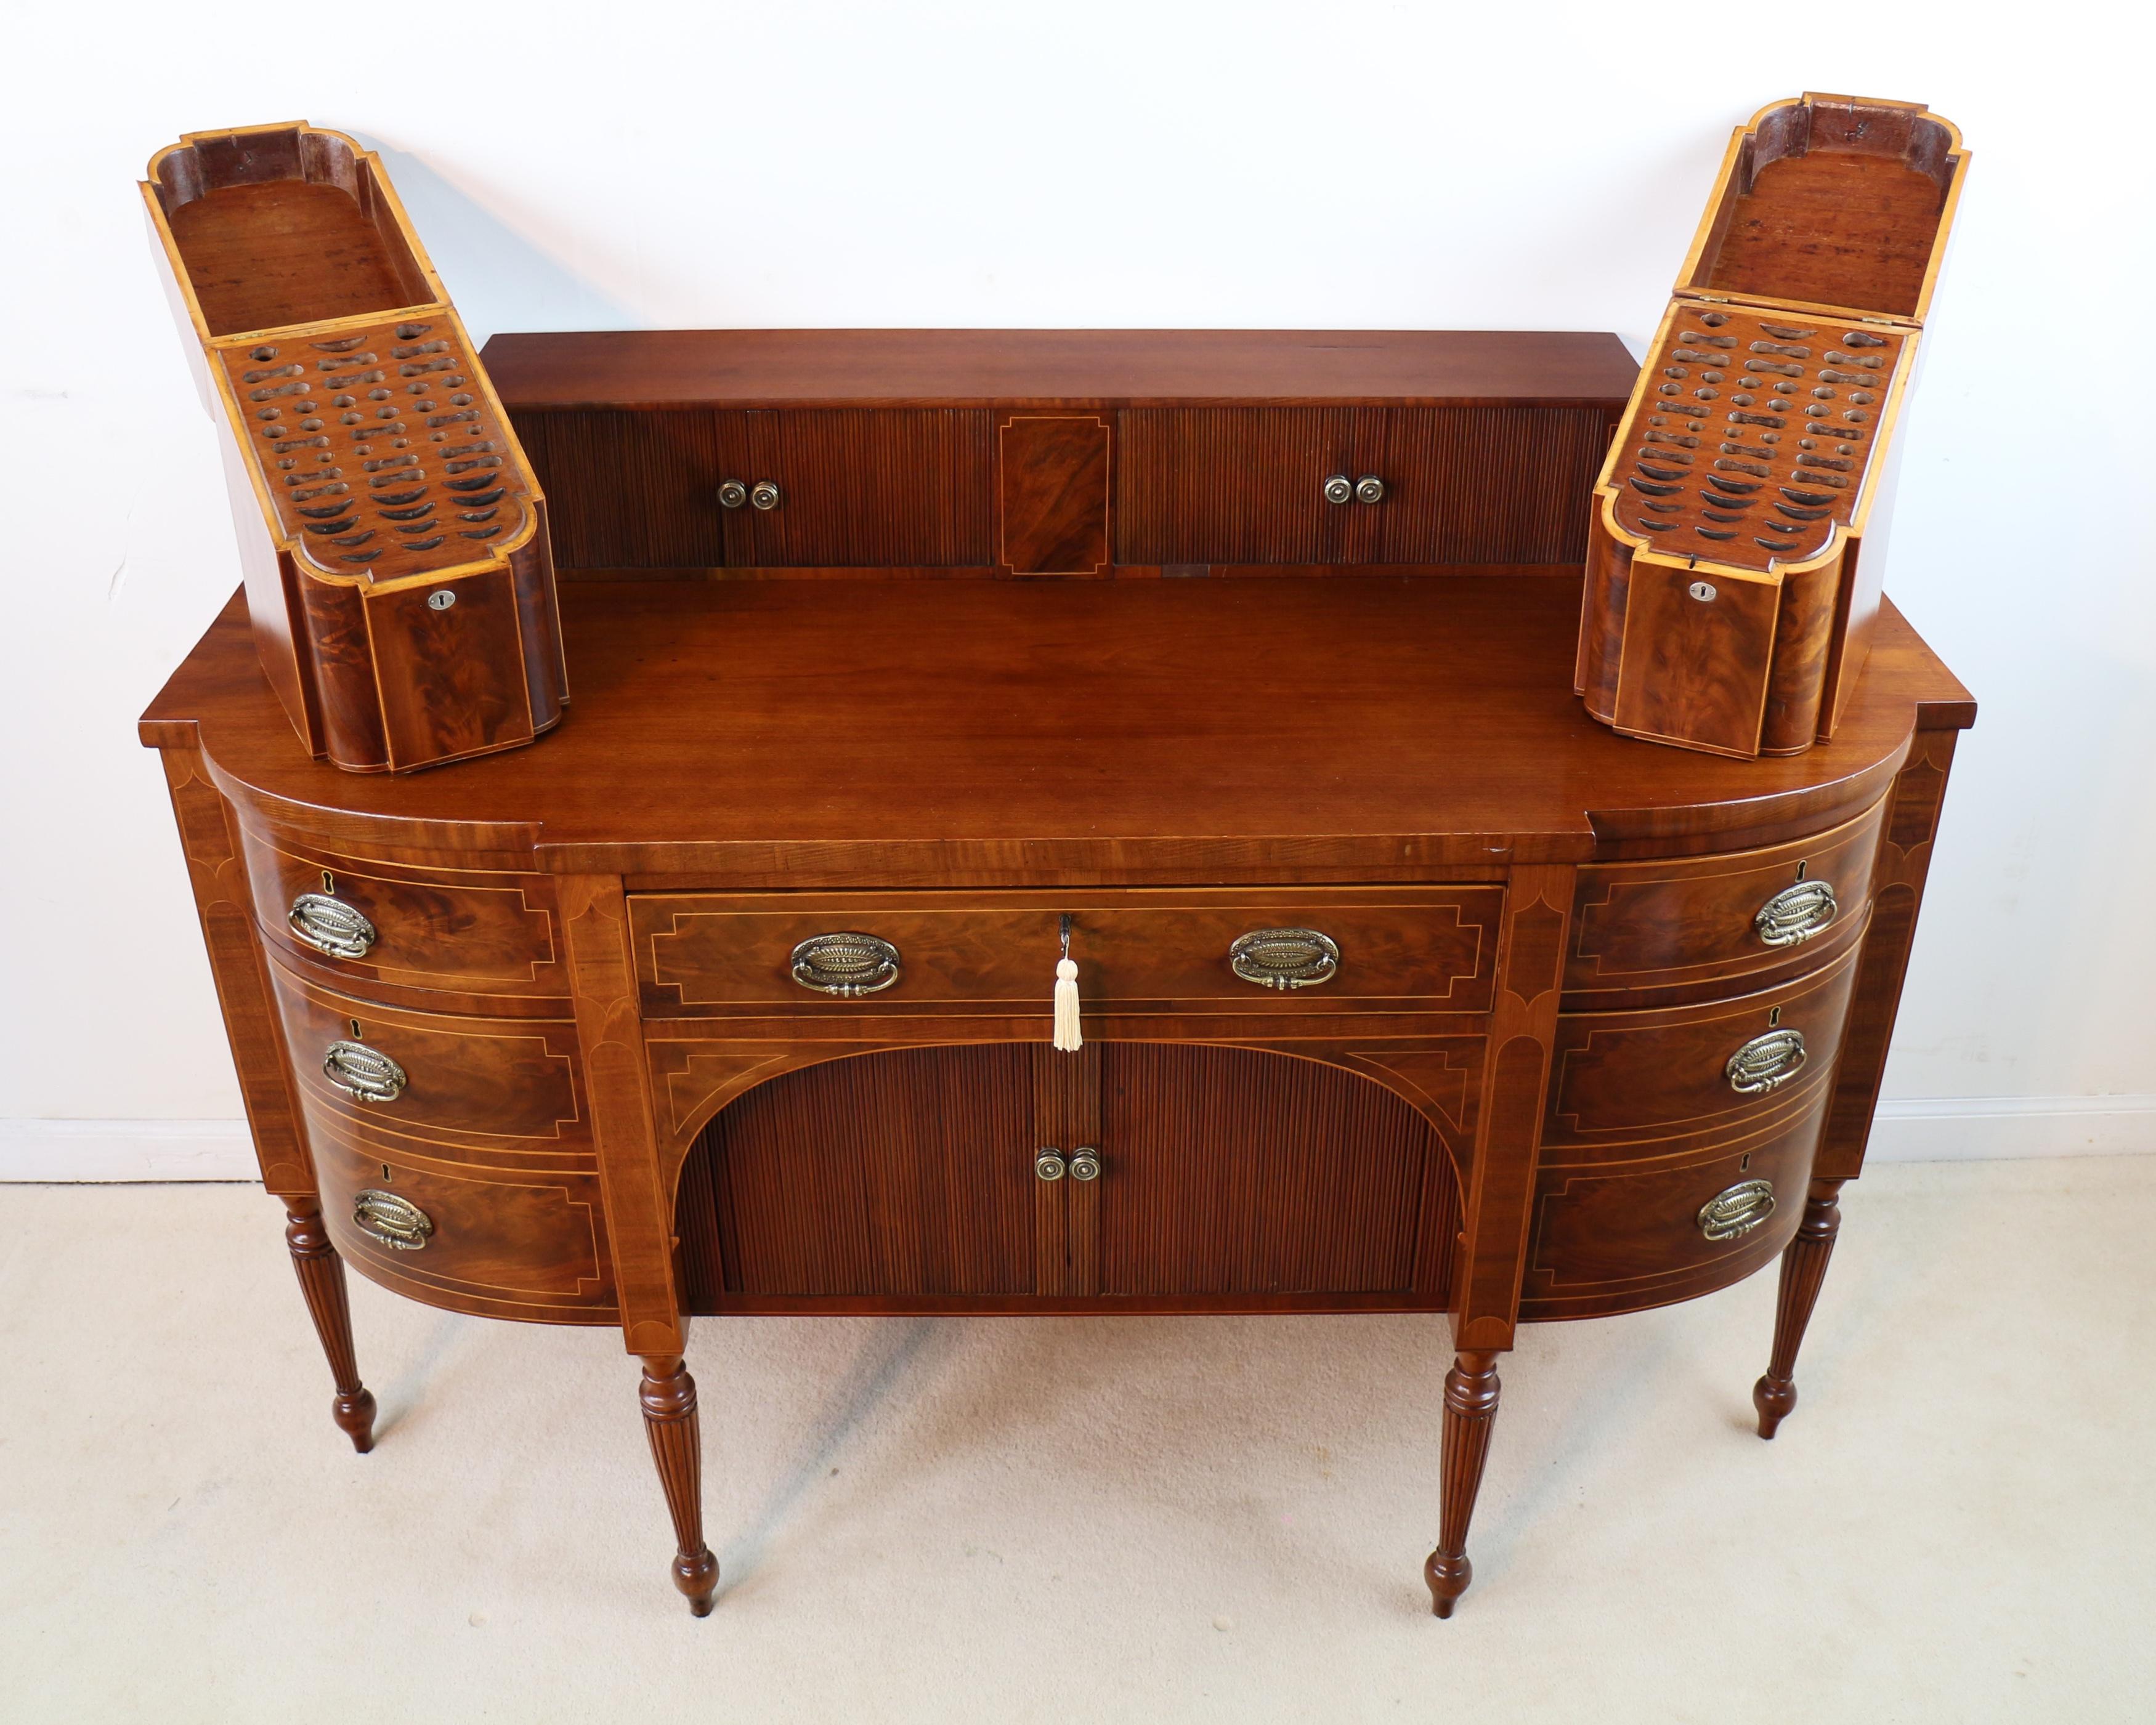 Antique George III Scottish Flame Mahogany Inlaid Stageback Cellarette Sideboard For Sale 8